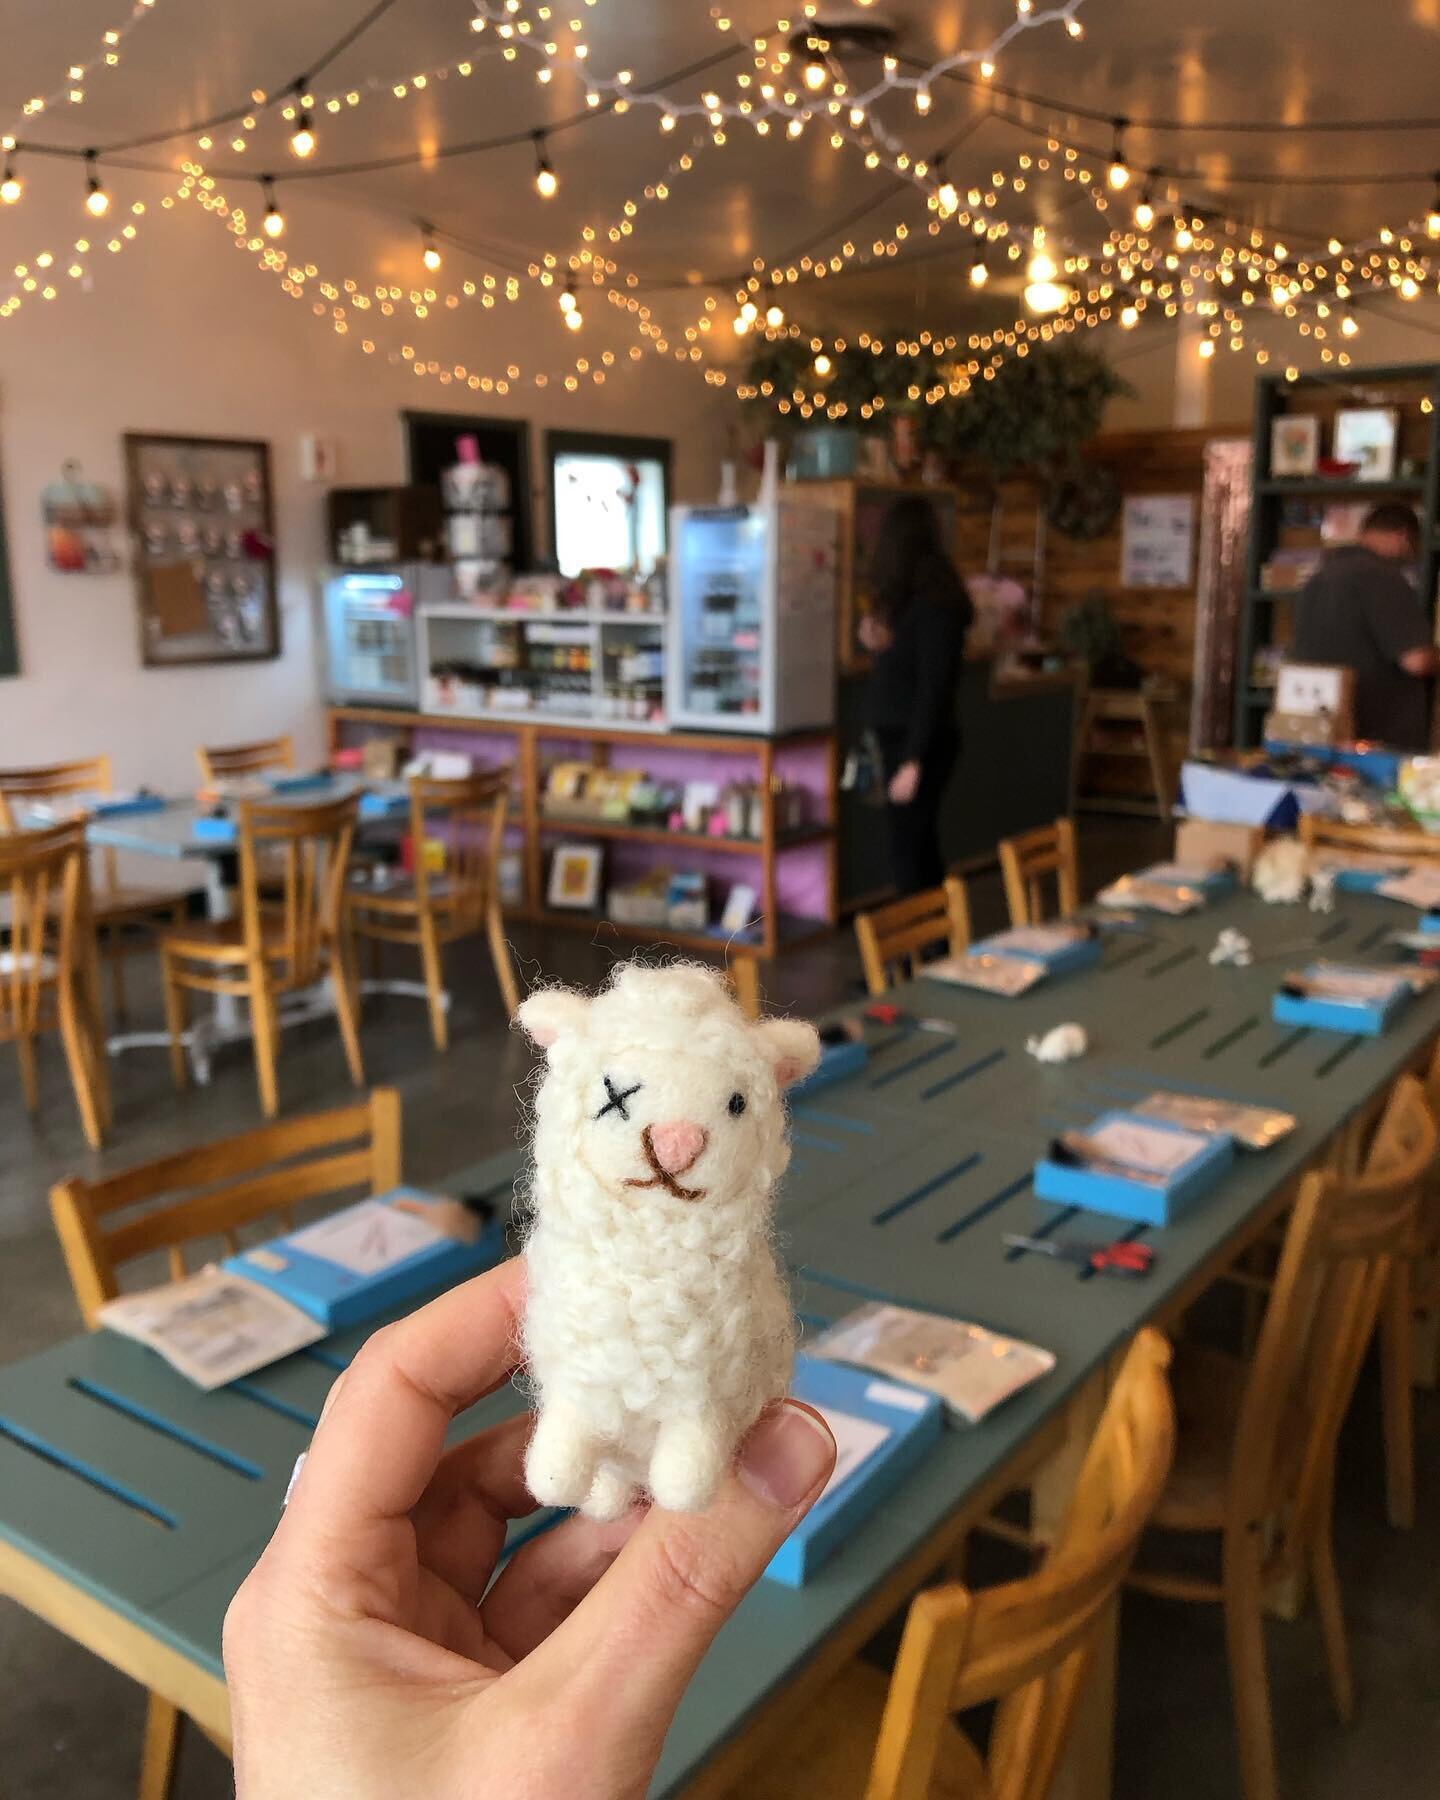 Lil sheep felting workshop! 🐑 The first class sold out liketey split so we added an afternoon time slot. Join us! This is a friendly project for beginners. 💟

Saturday, April 13th, 2-4:30pm
In person wkshp at @zuckercreme
Deets + sign up in ye olde